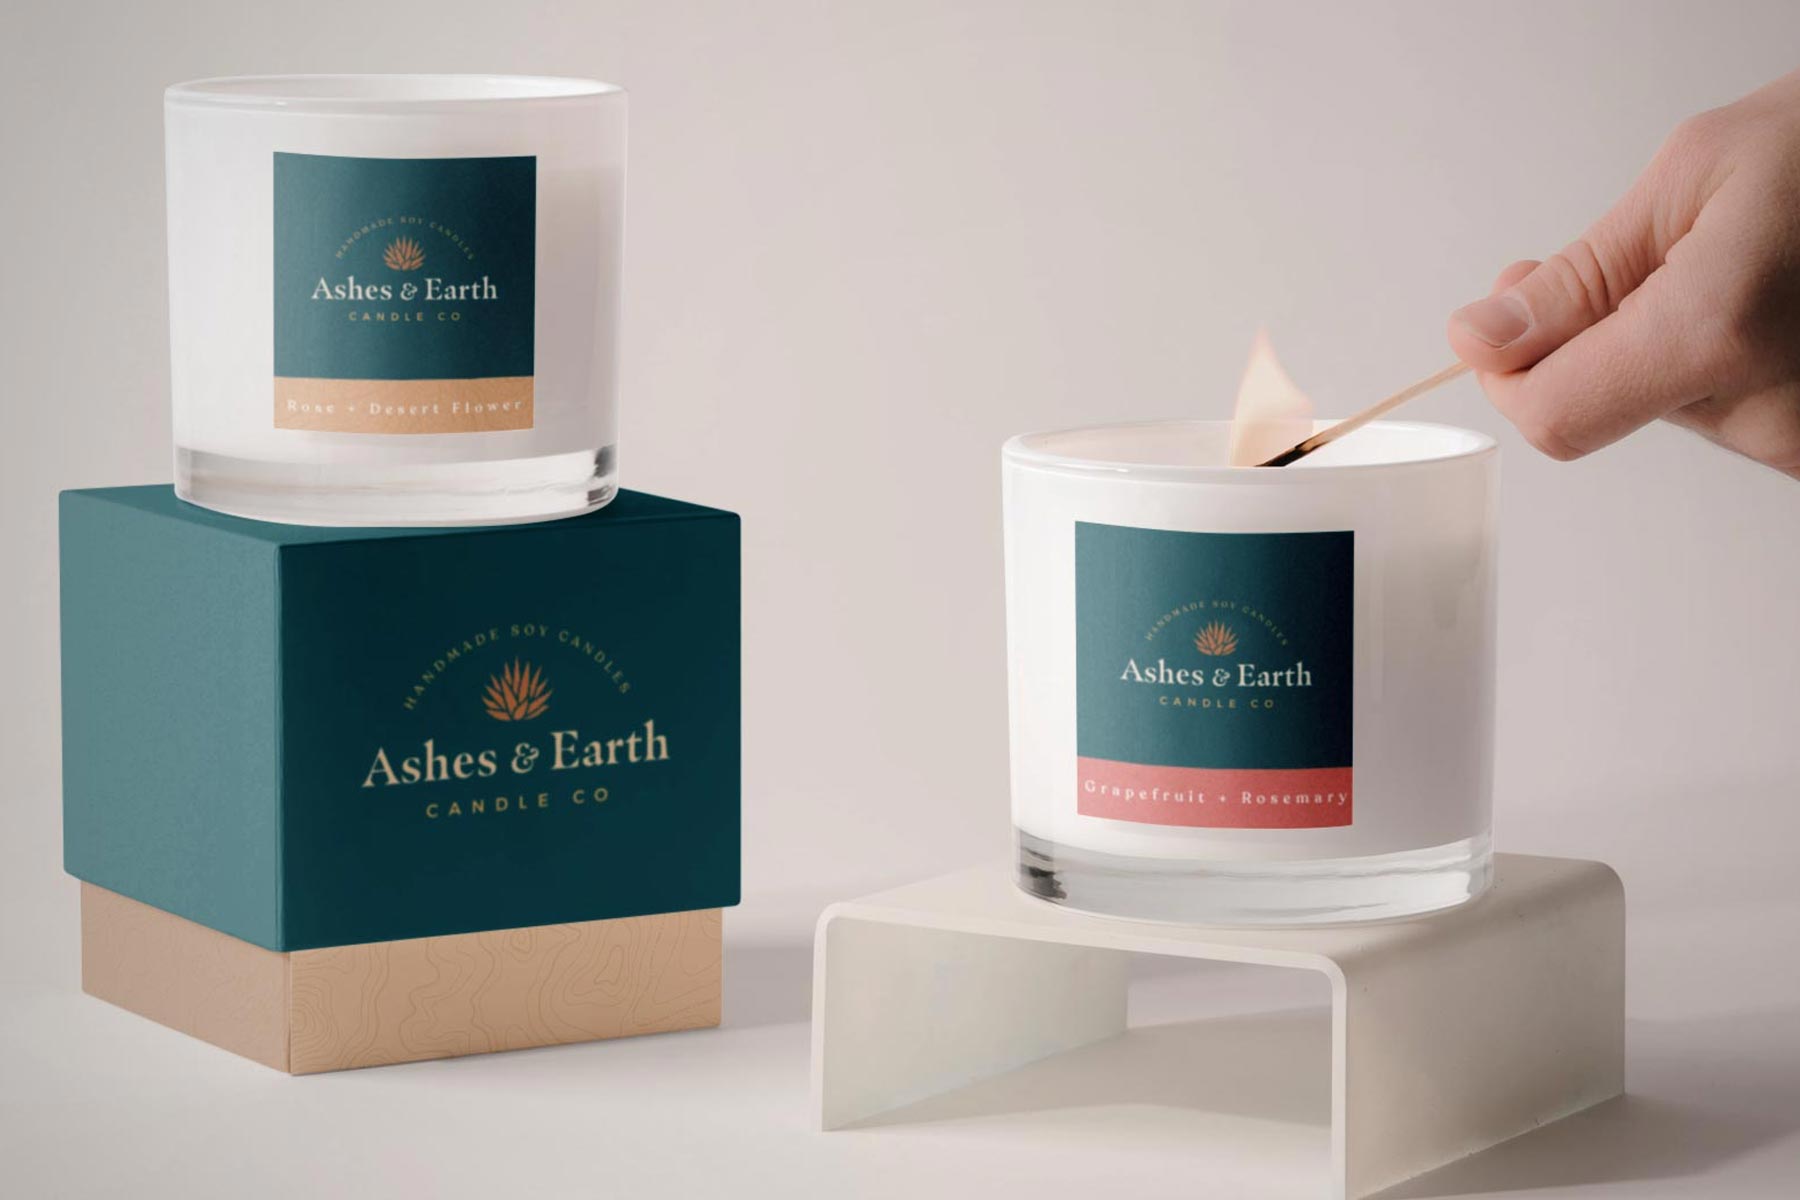 Packaging and print for Ashes & Earth Candle Co.